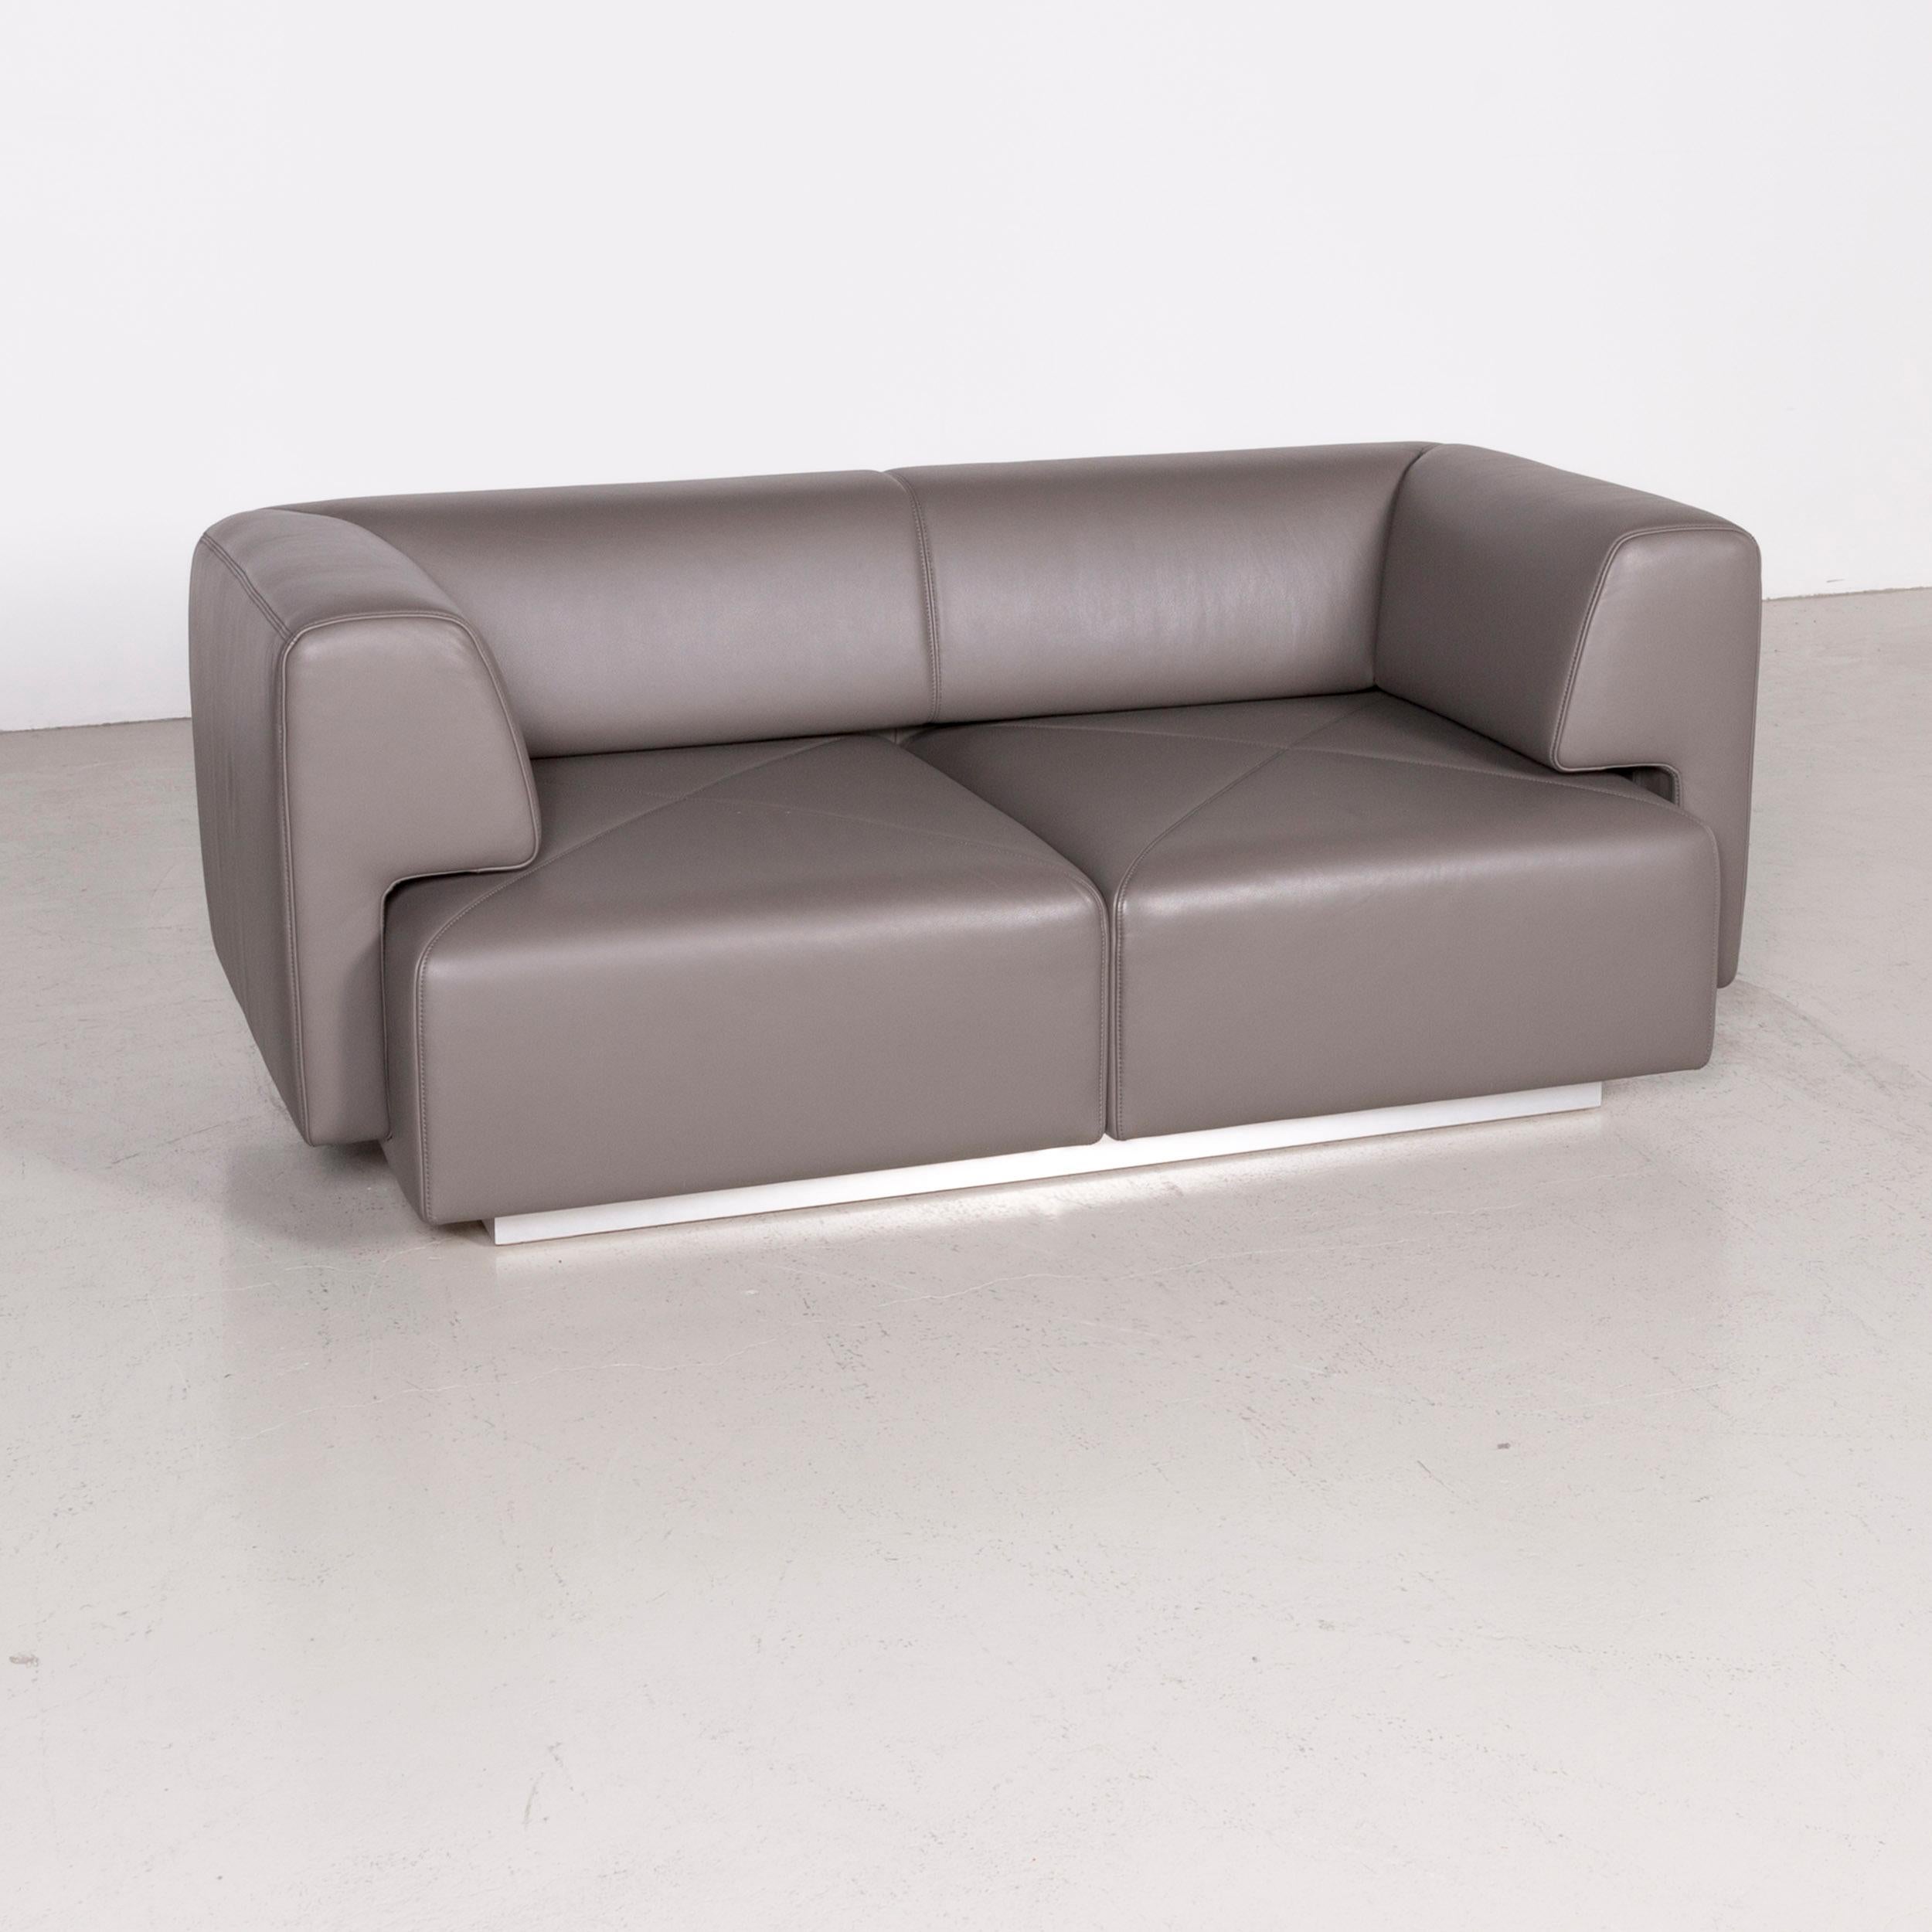 German De Sede Designer Leather Sofa Grey Two-Seat Couch For Sale